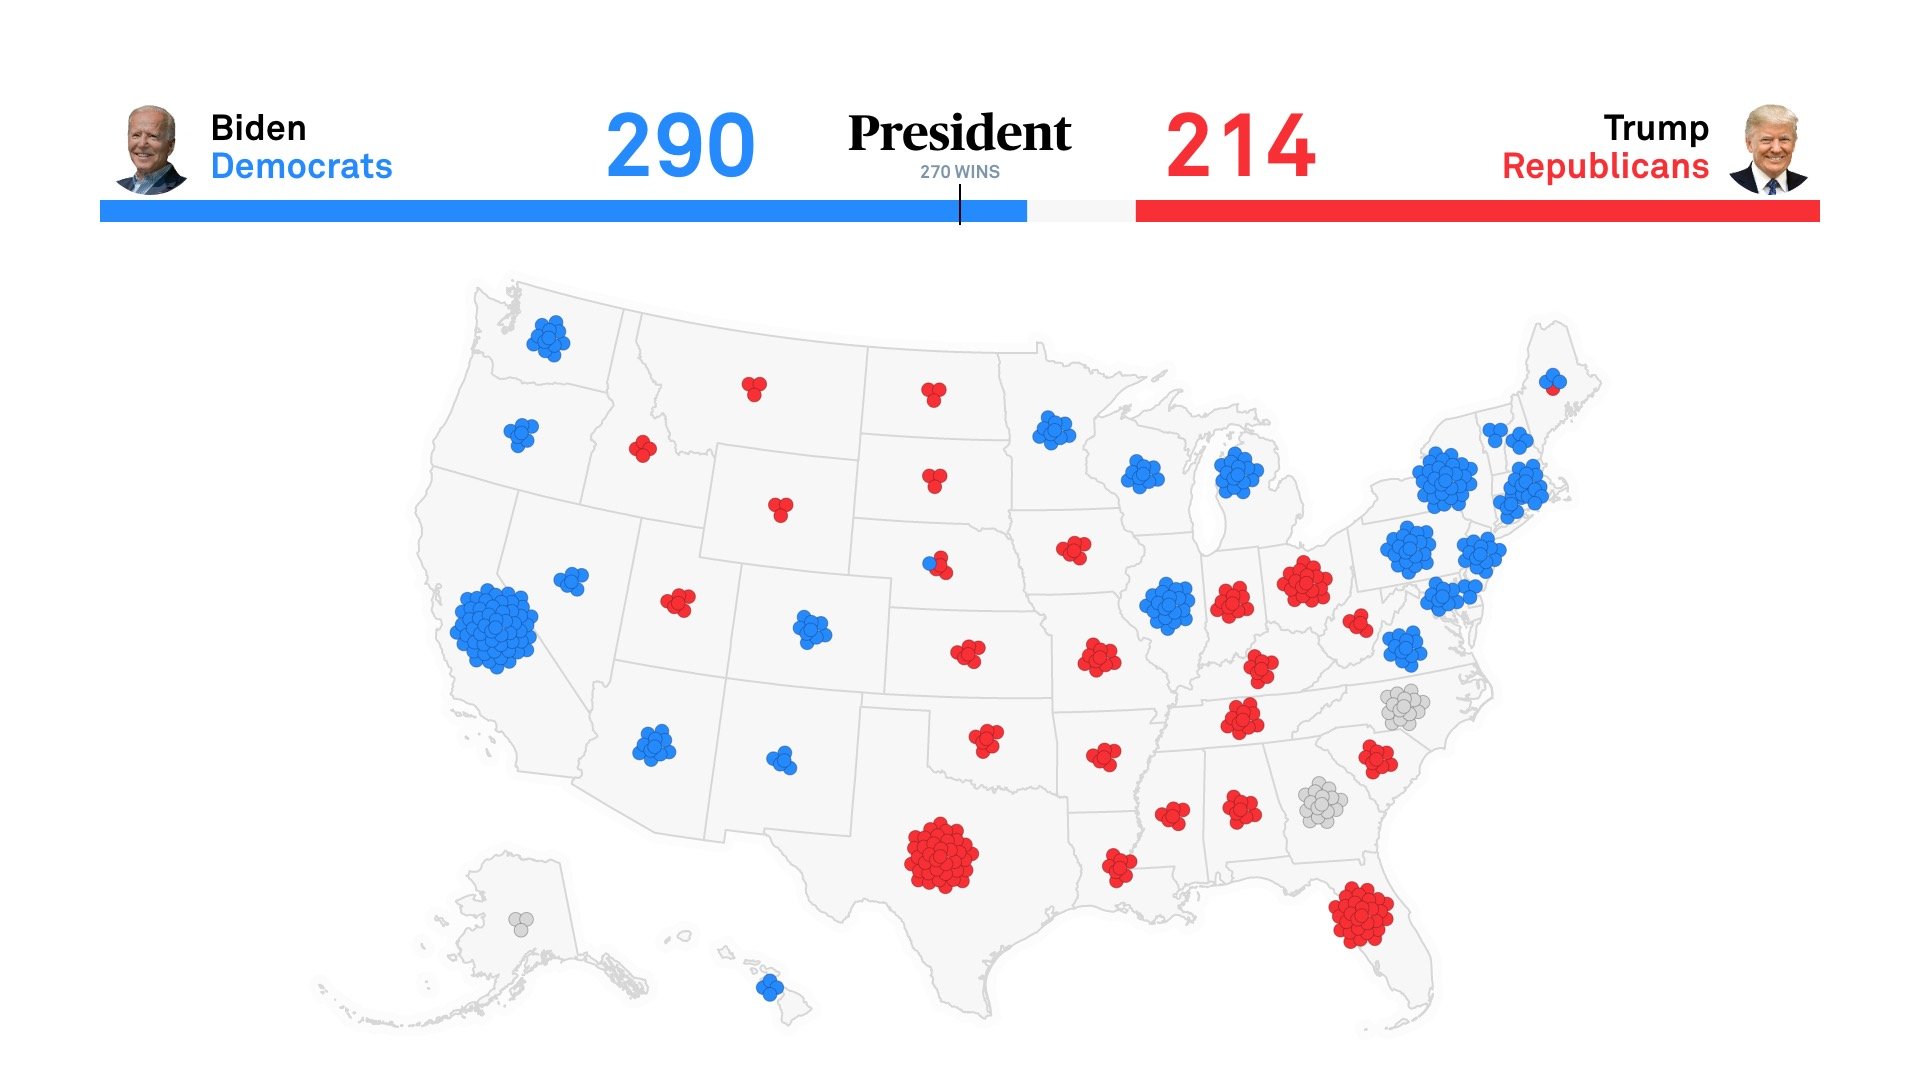 PBS NewsHour's electoral map uses colored dots against a background of states to illustrate electoral vote counts.